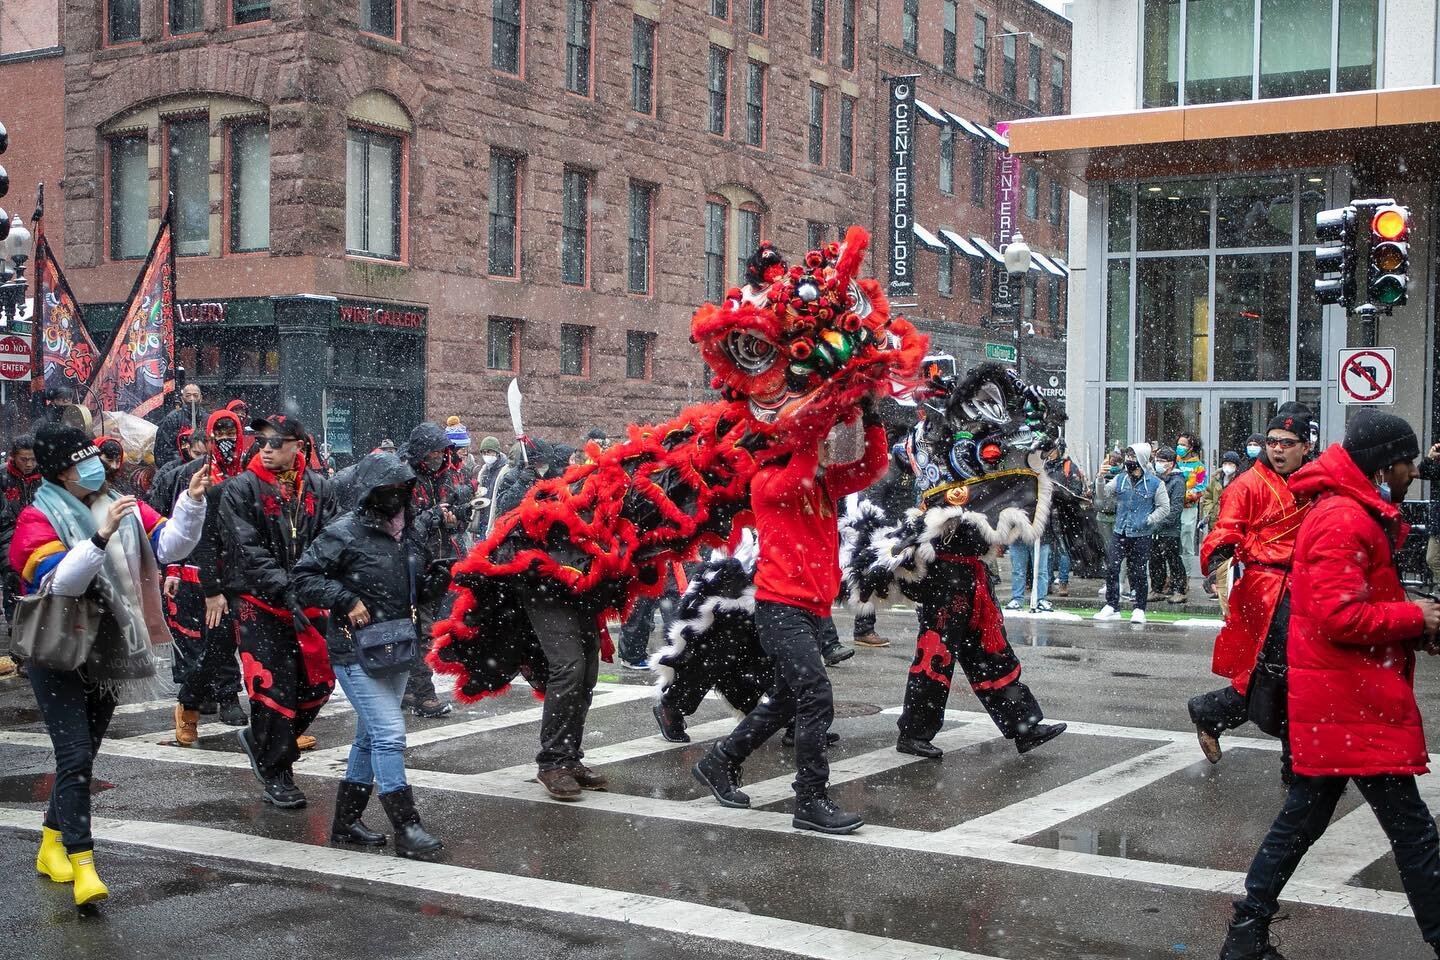 Finally left an athletic facility to take photos outside. Here are picture I took for @thescopeboston from the Lunar New Year celebration in Boston&rsquo;s Chinatown this past Sunday.